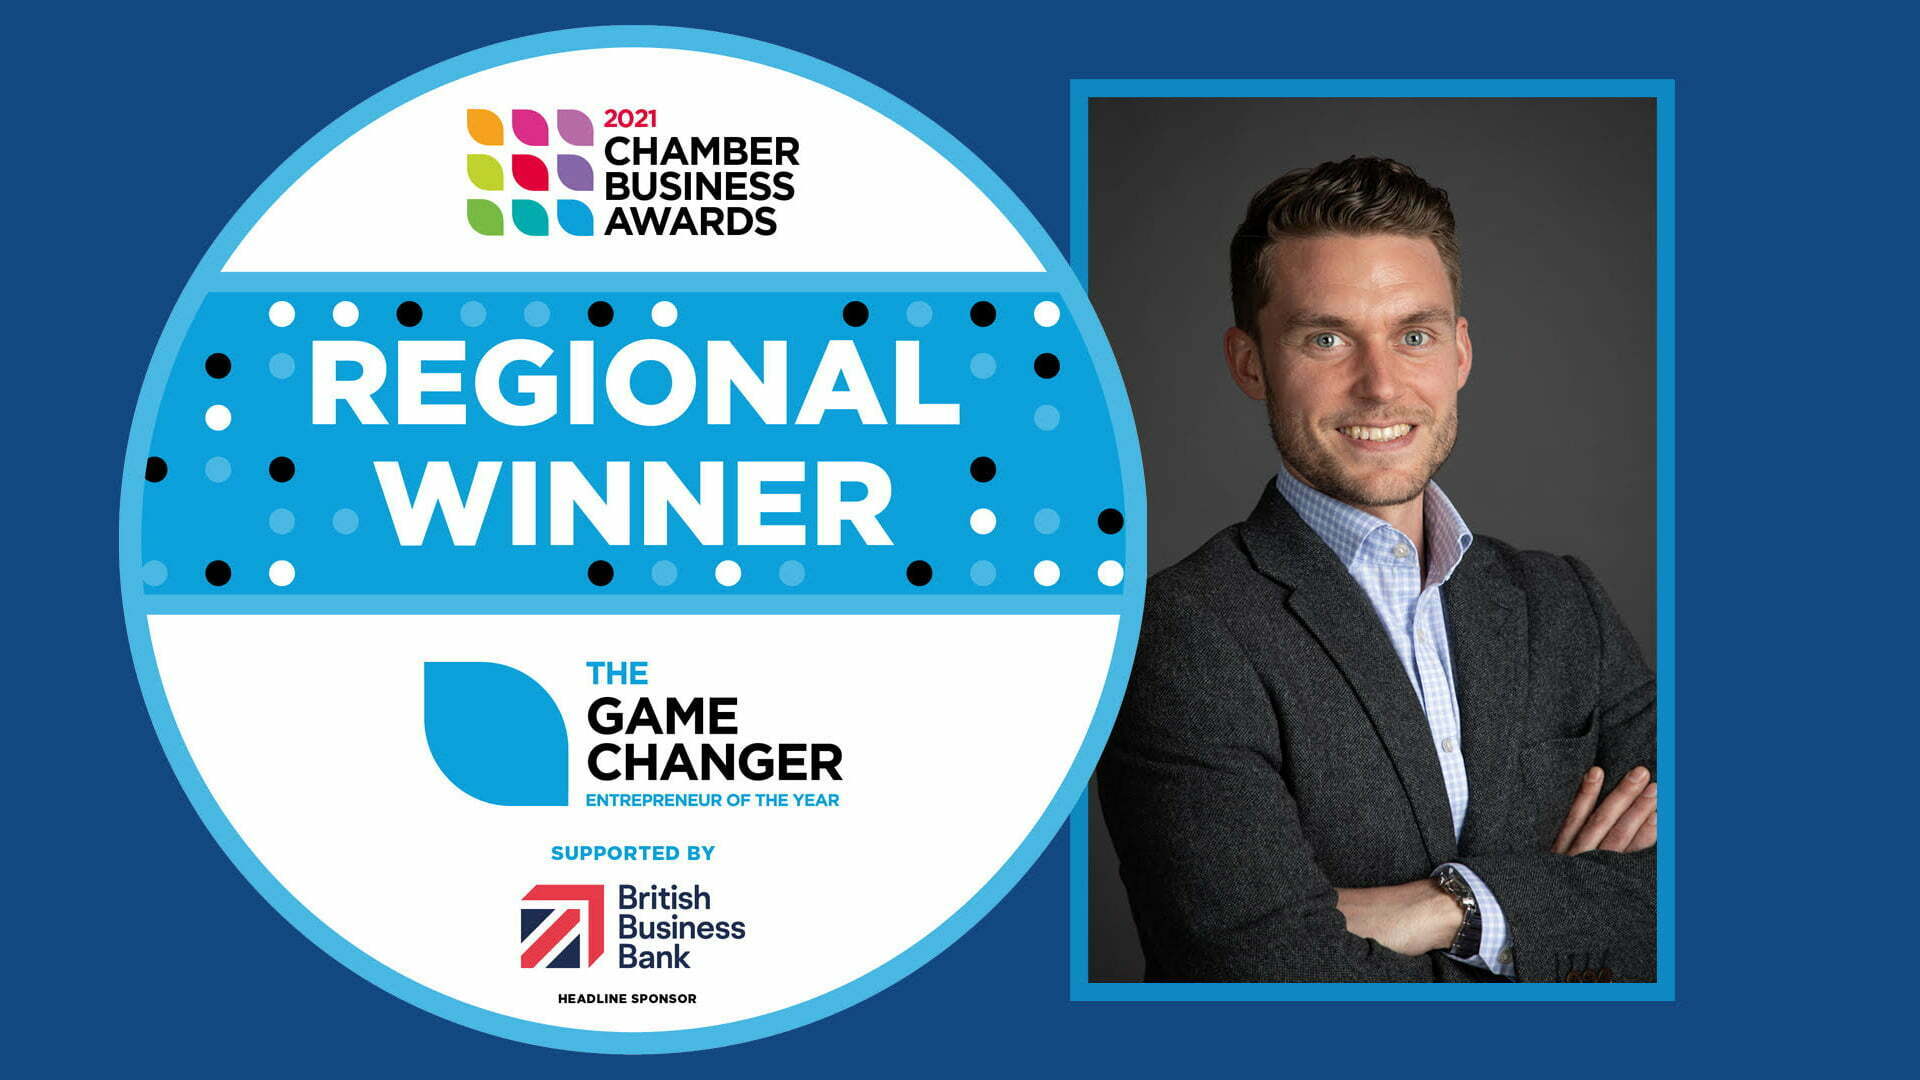 The Game Changer Entrepreneur of the Year award for the North West region